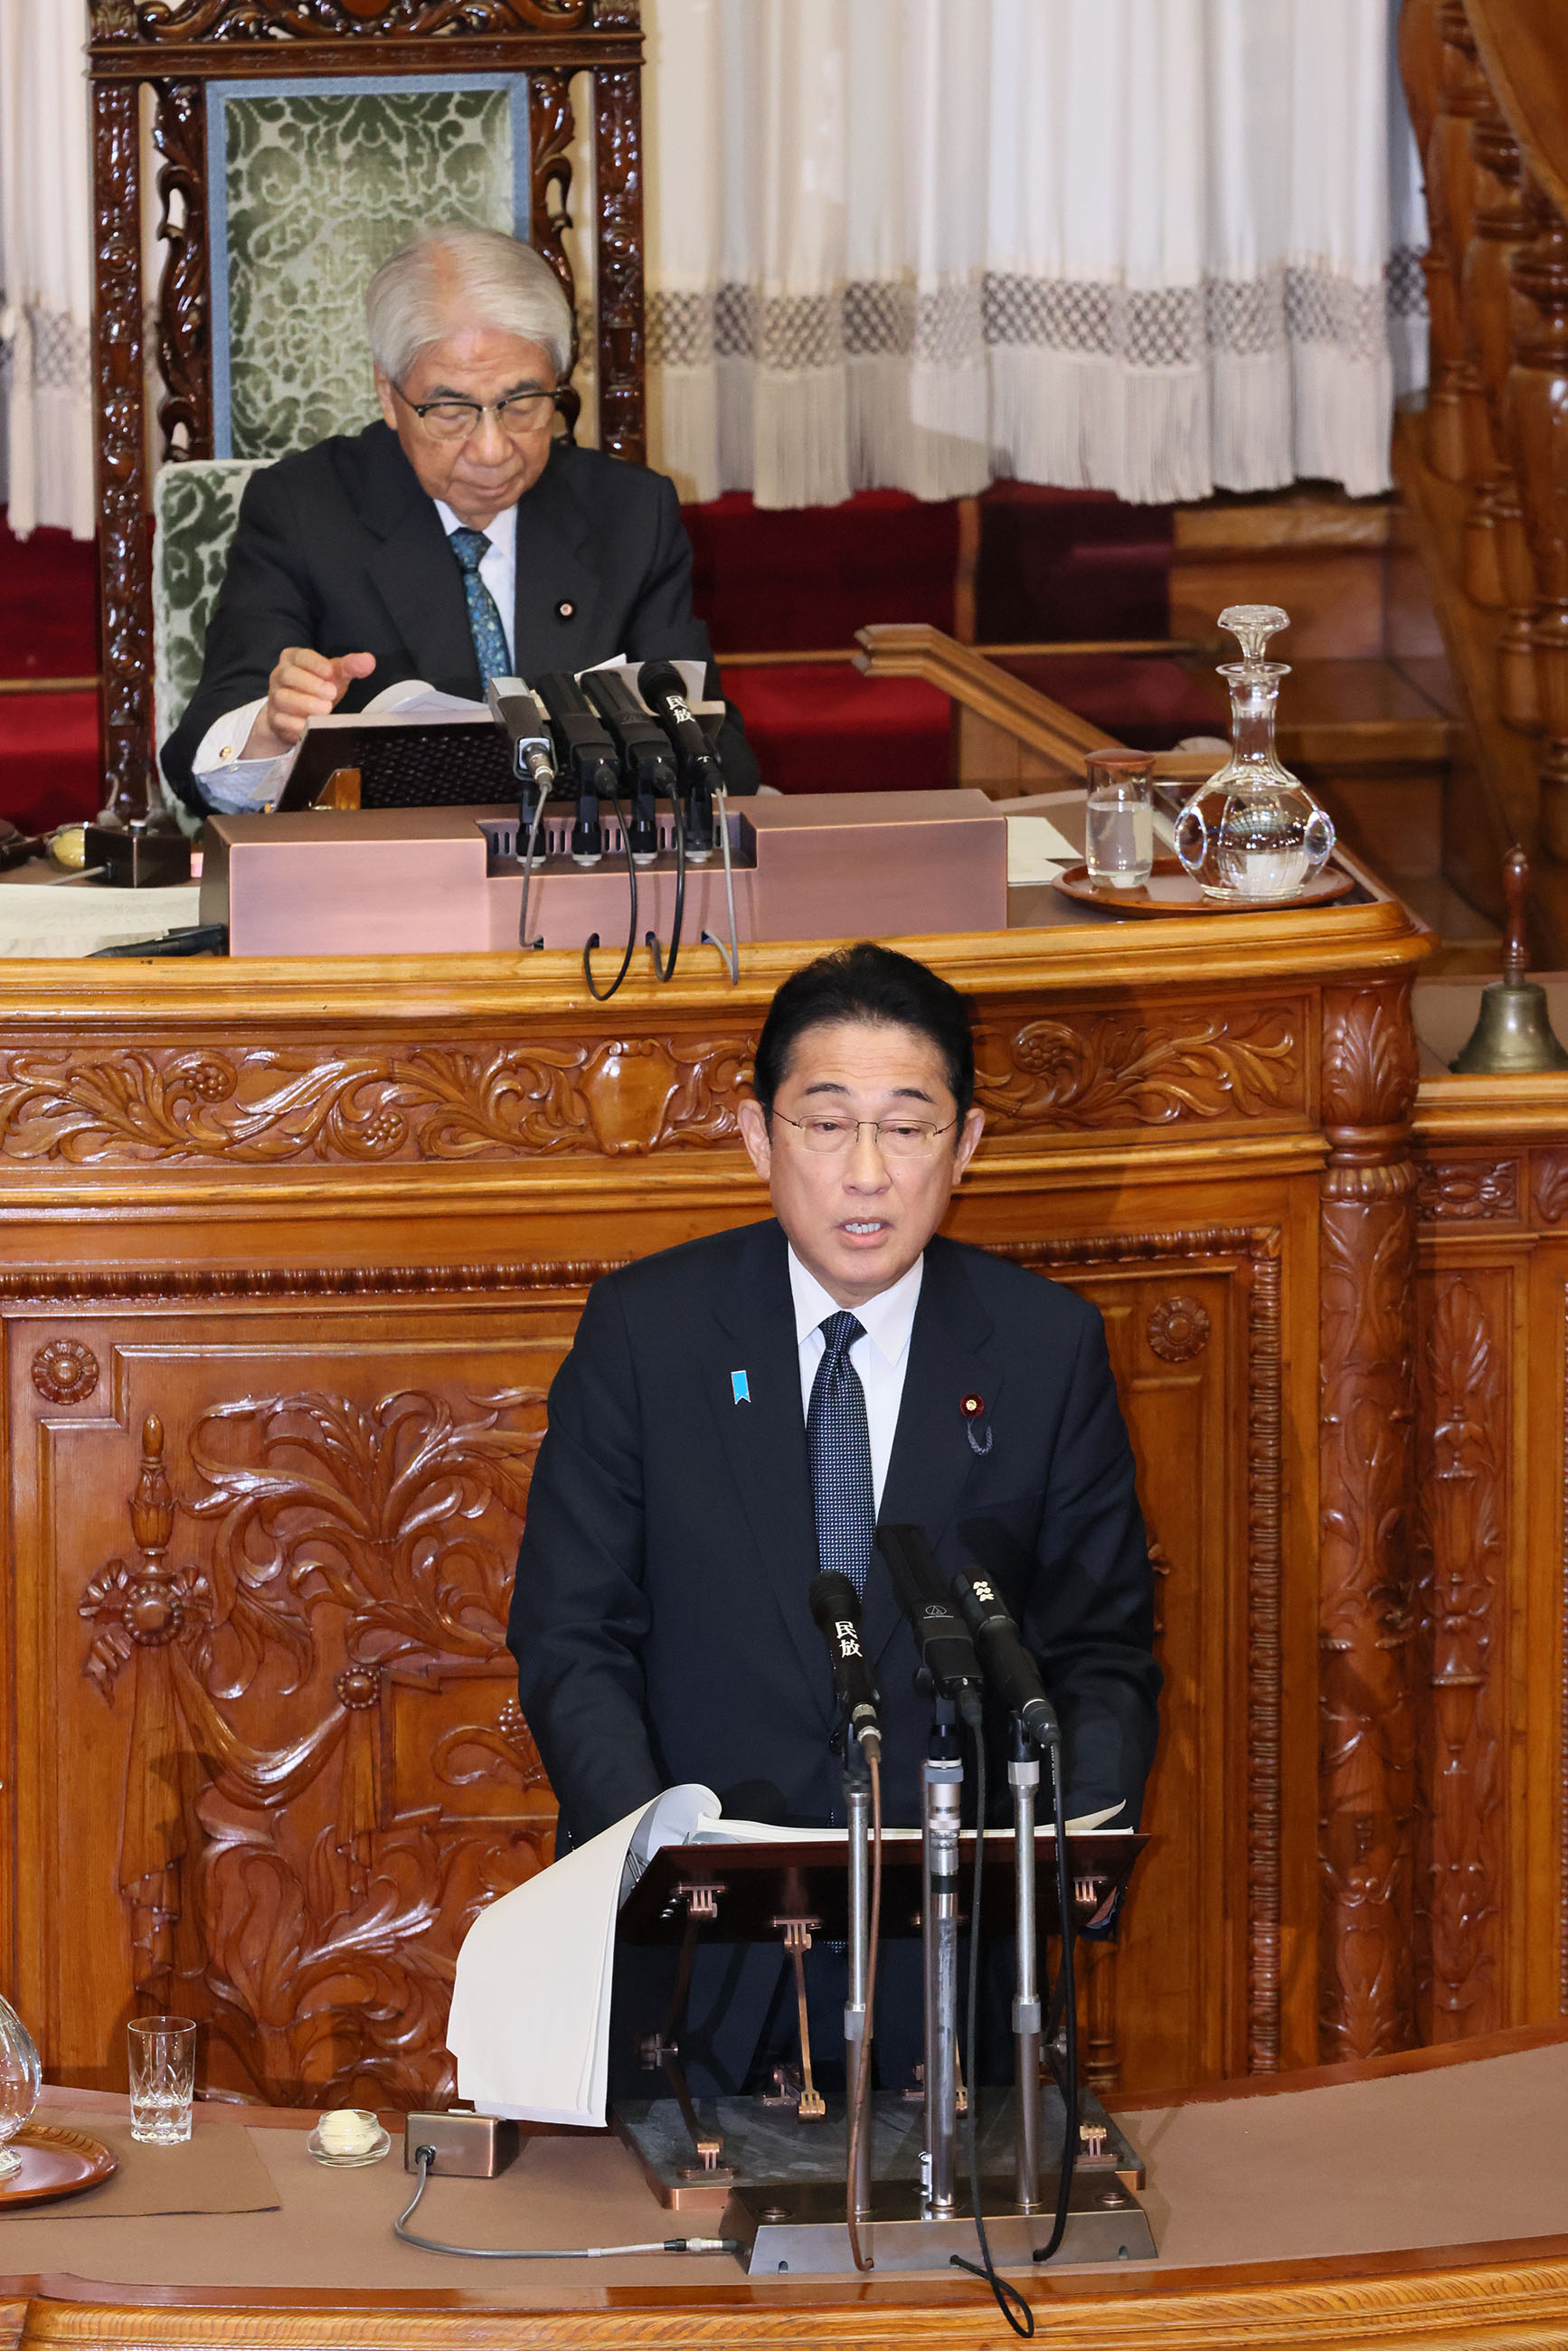 Prime Minister Kishida delivering a policy speech during the plenary session of the House of Councillors (6)